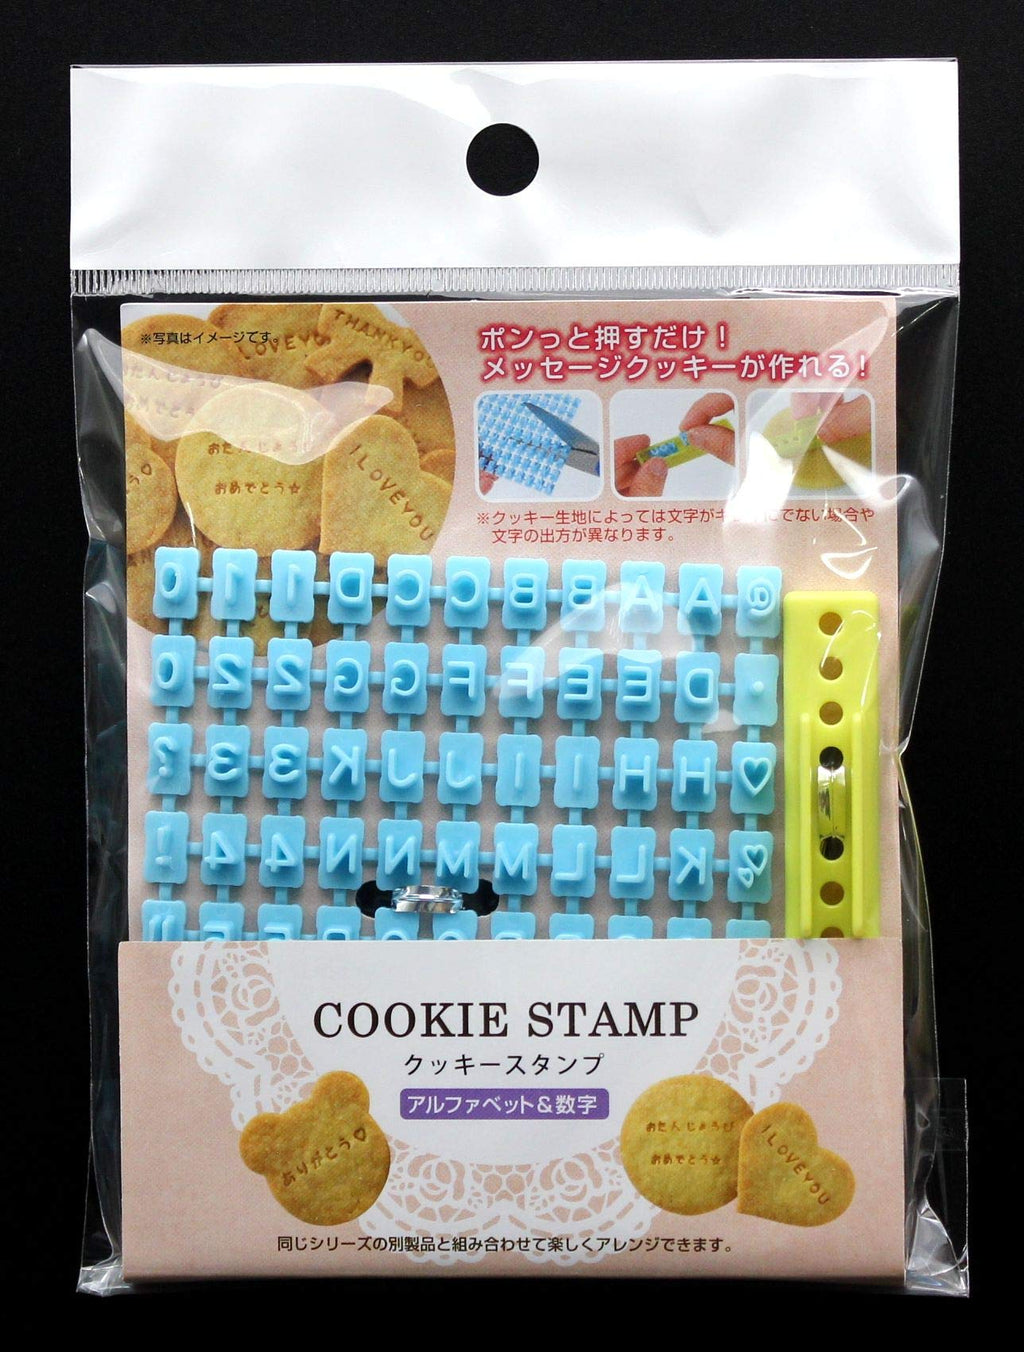  [AUSTRALIA] - Cookie Stamp Alphabets and Numbers from Japan